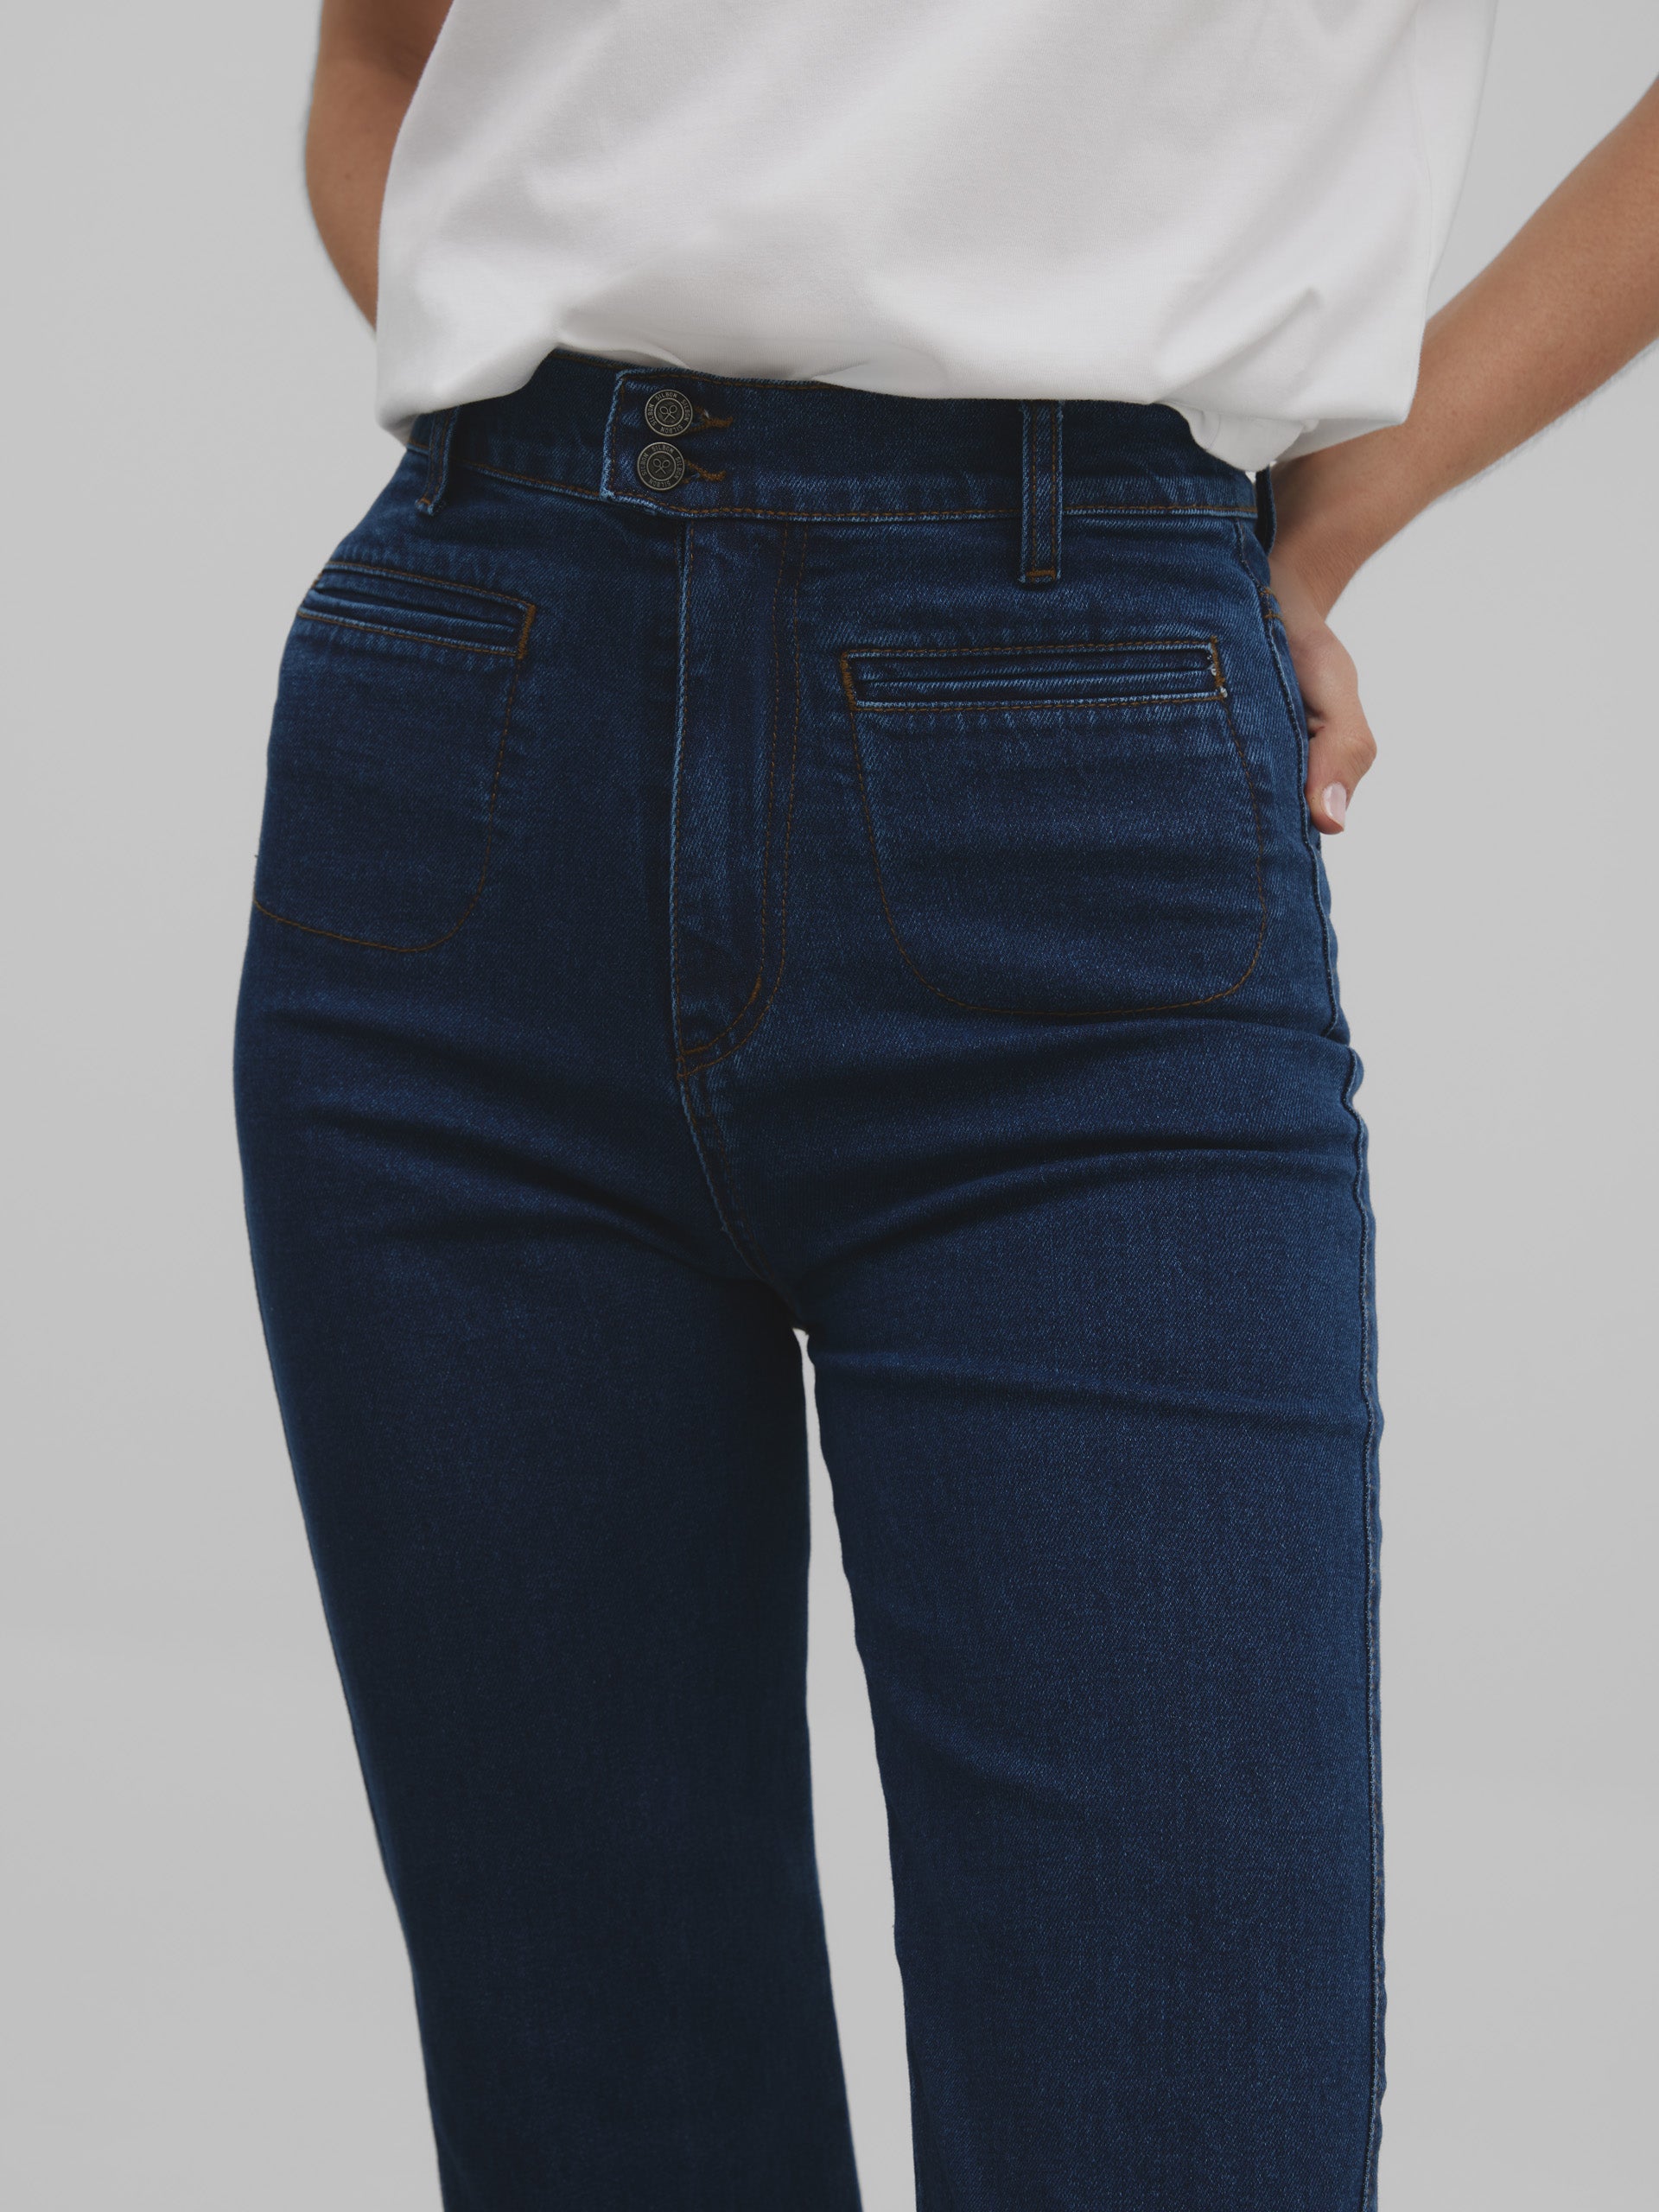 Flare denim pants with pockets